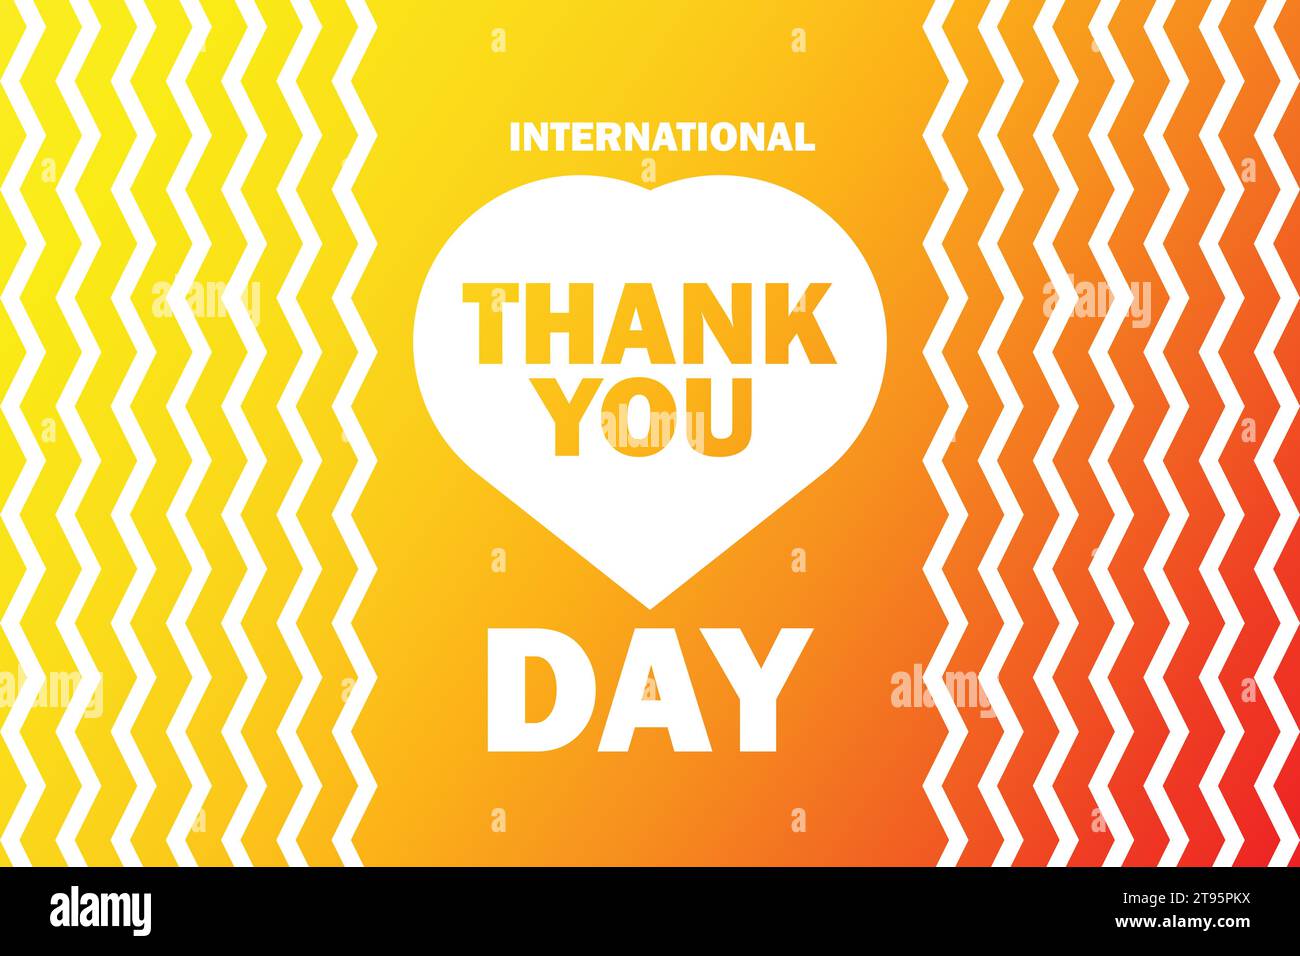 International Thank You Day Vector illustration. Holiday concept. Template for background,  banner, card, poster with text inscription. Stock Vector